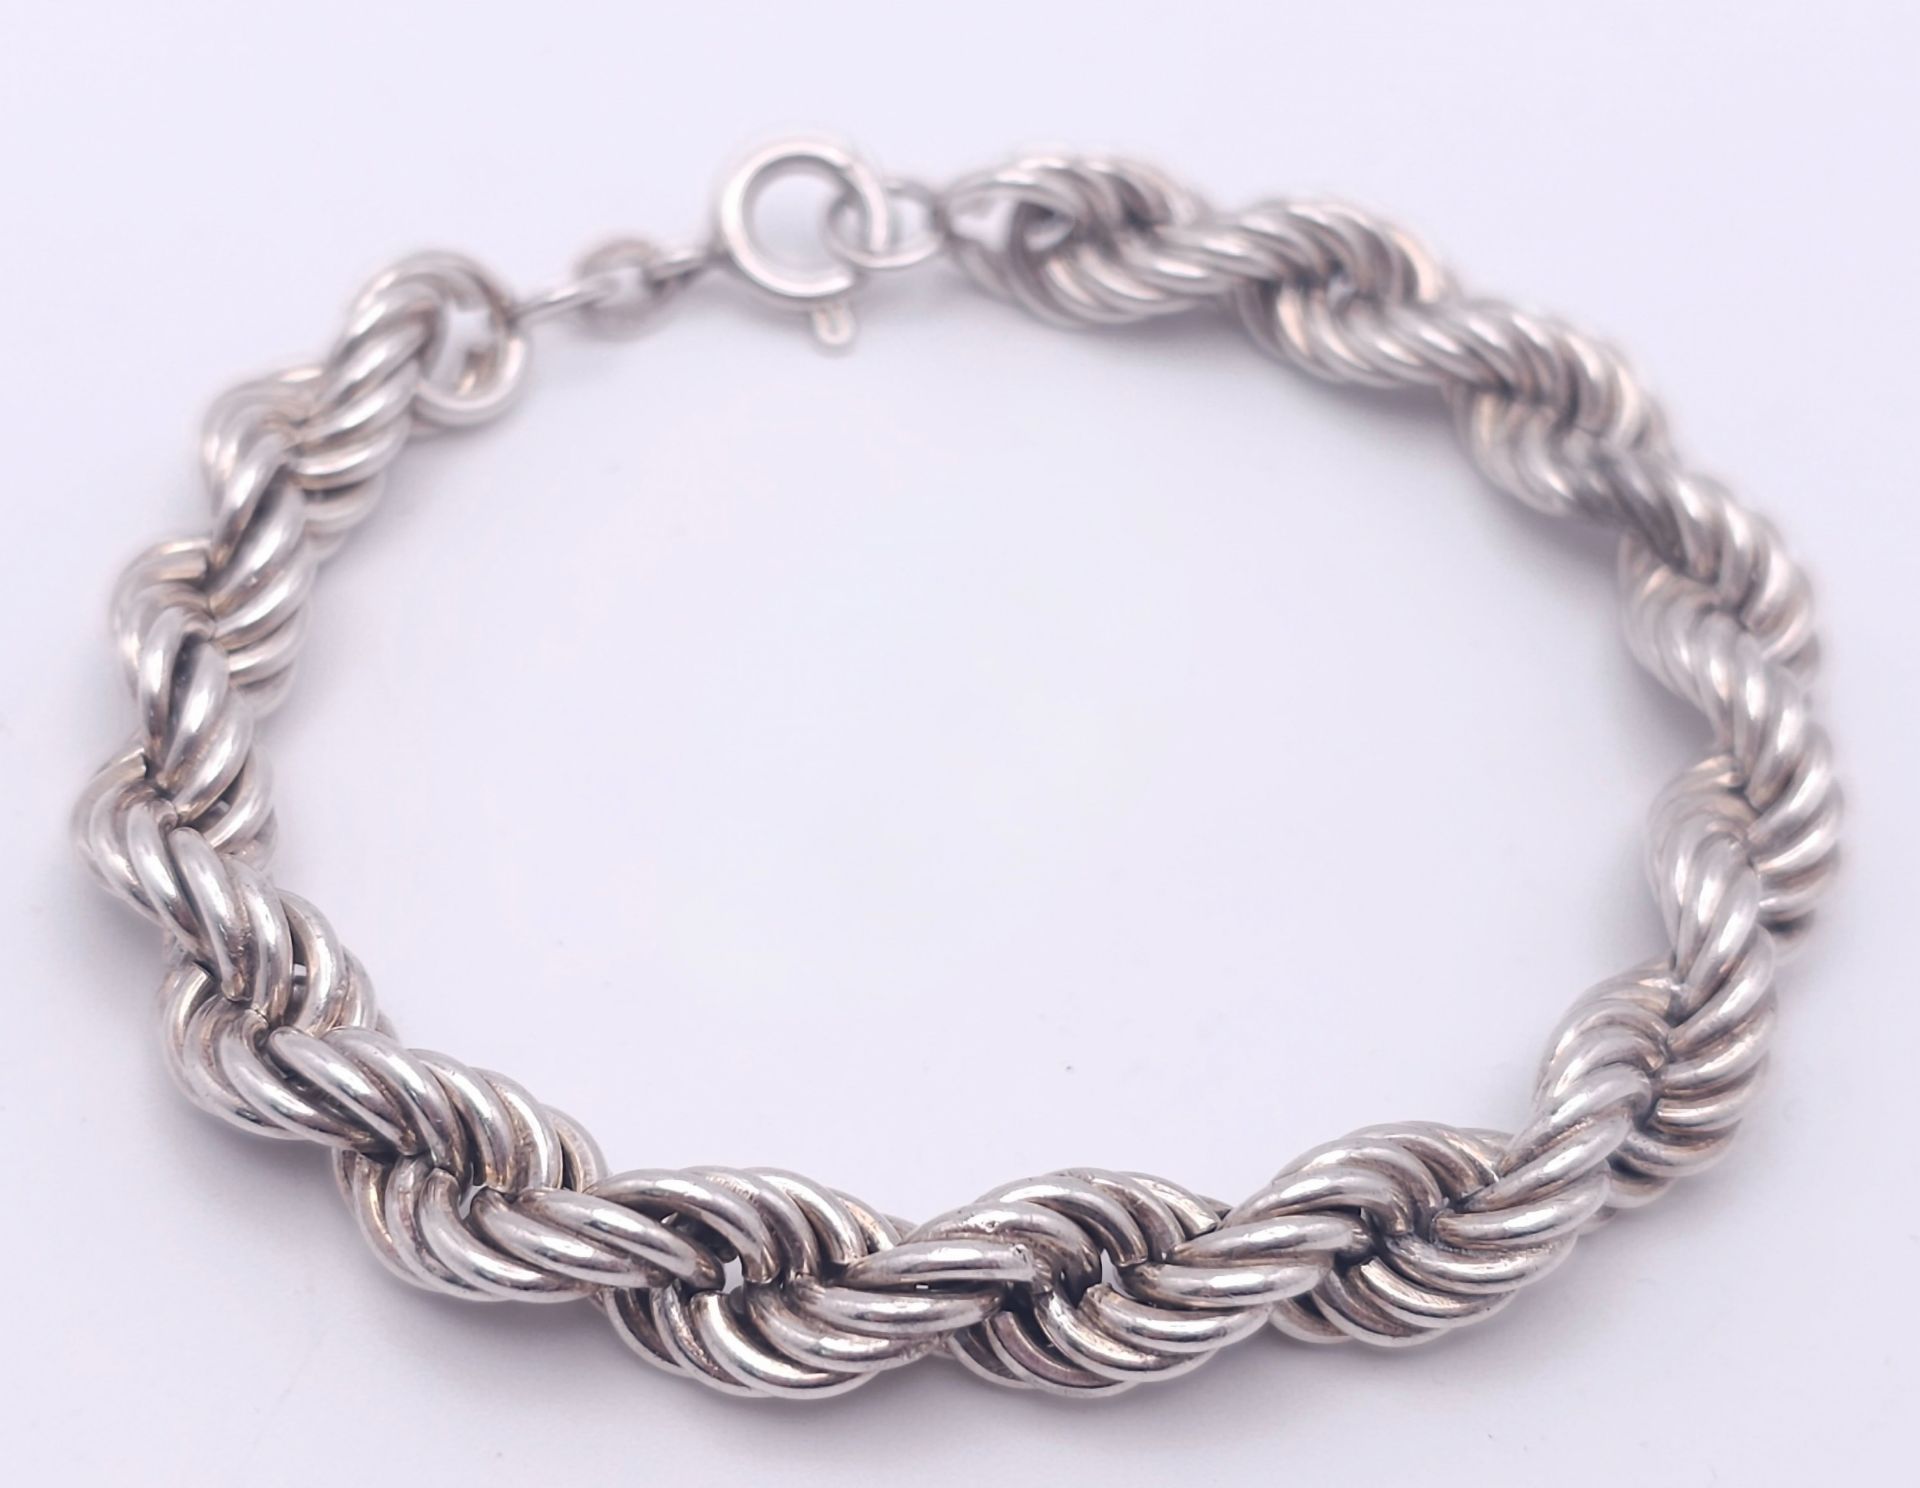 A STERLING SILVER SOLID HEAVY ROPE BRACELET. 22.5cm length, 46.6g total weight. Ref: SC 8083